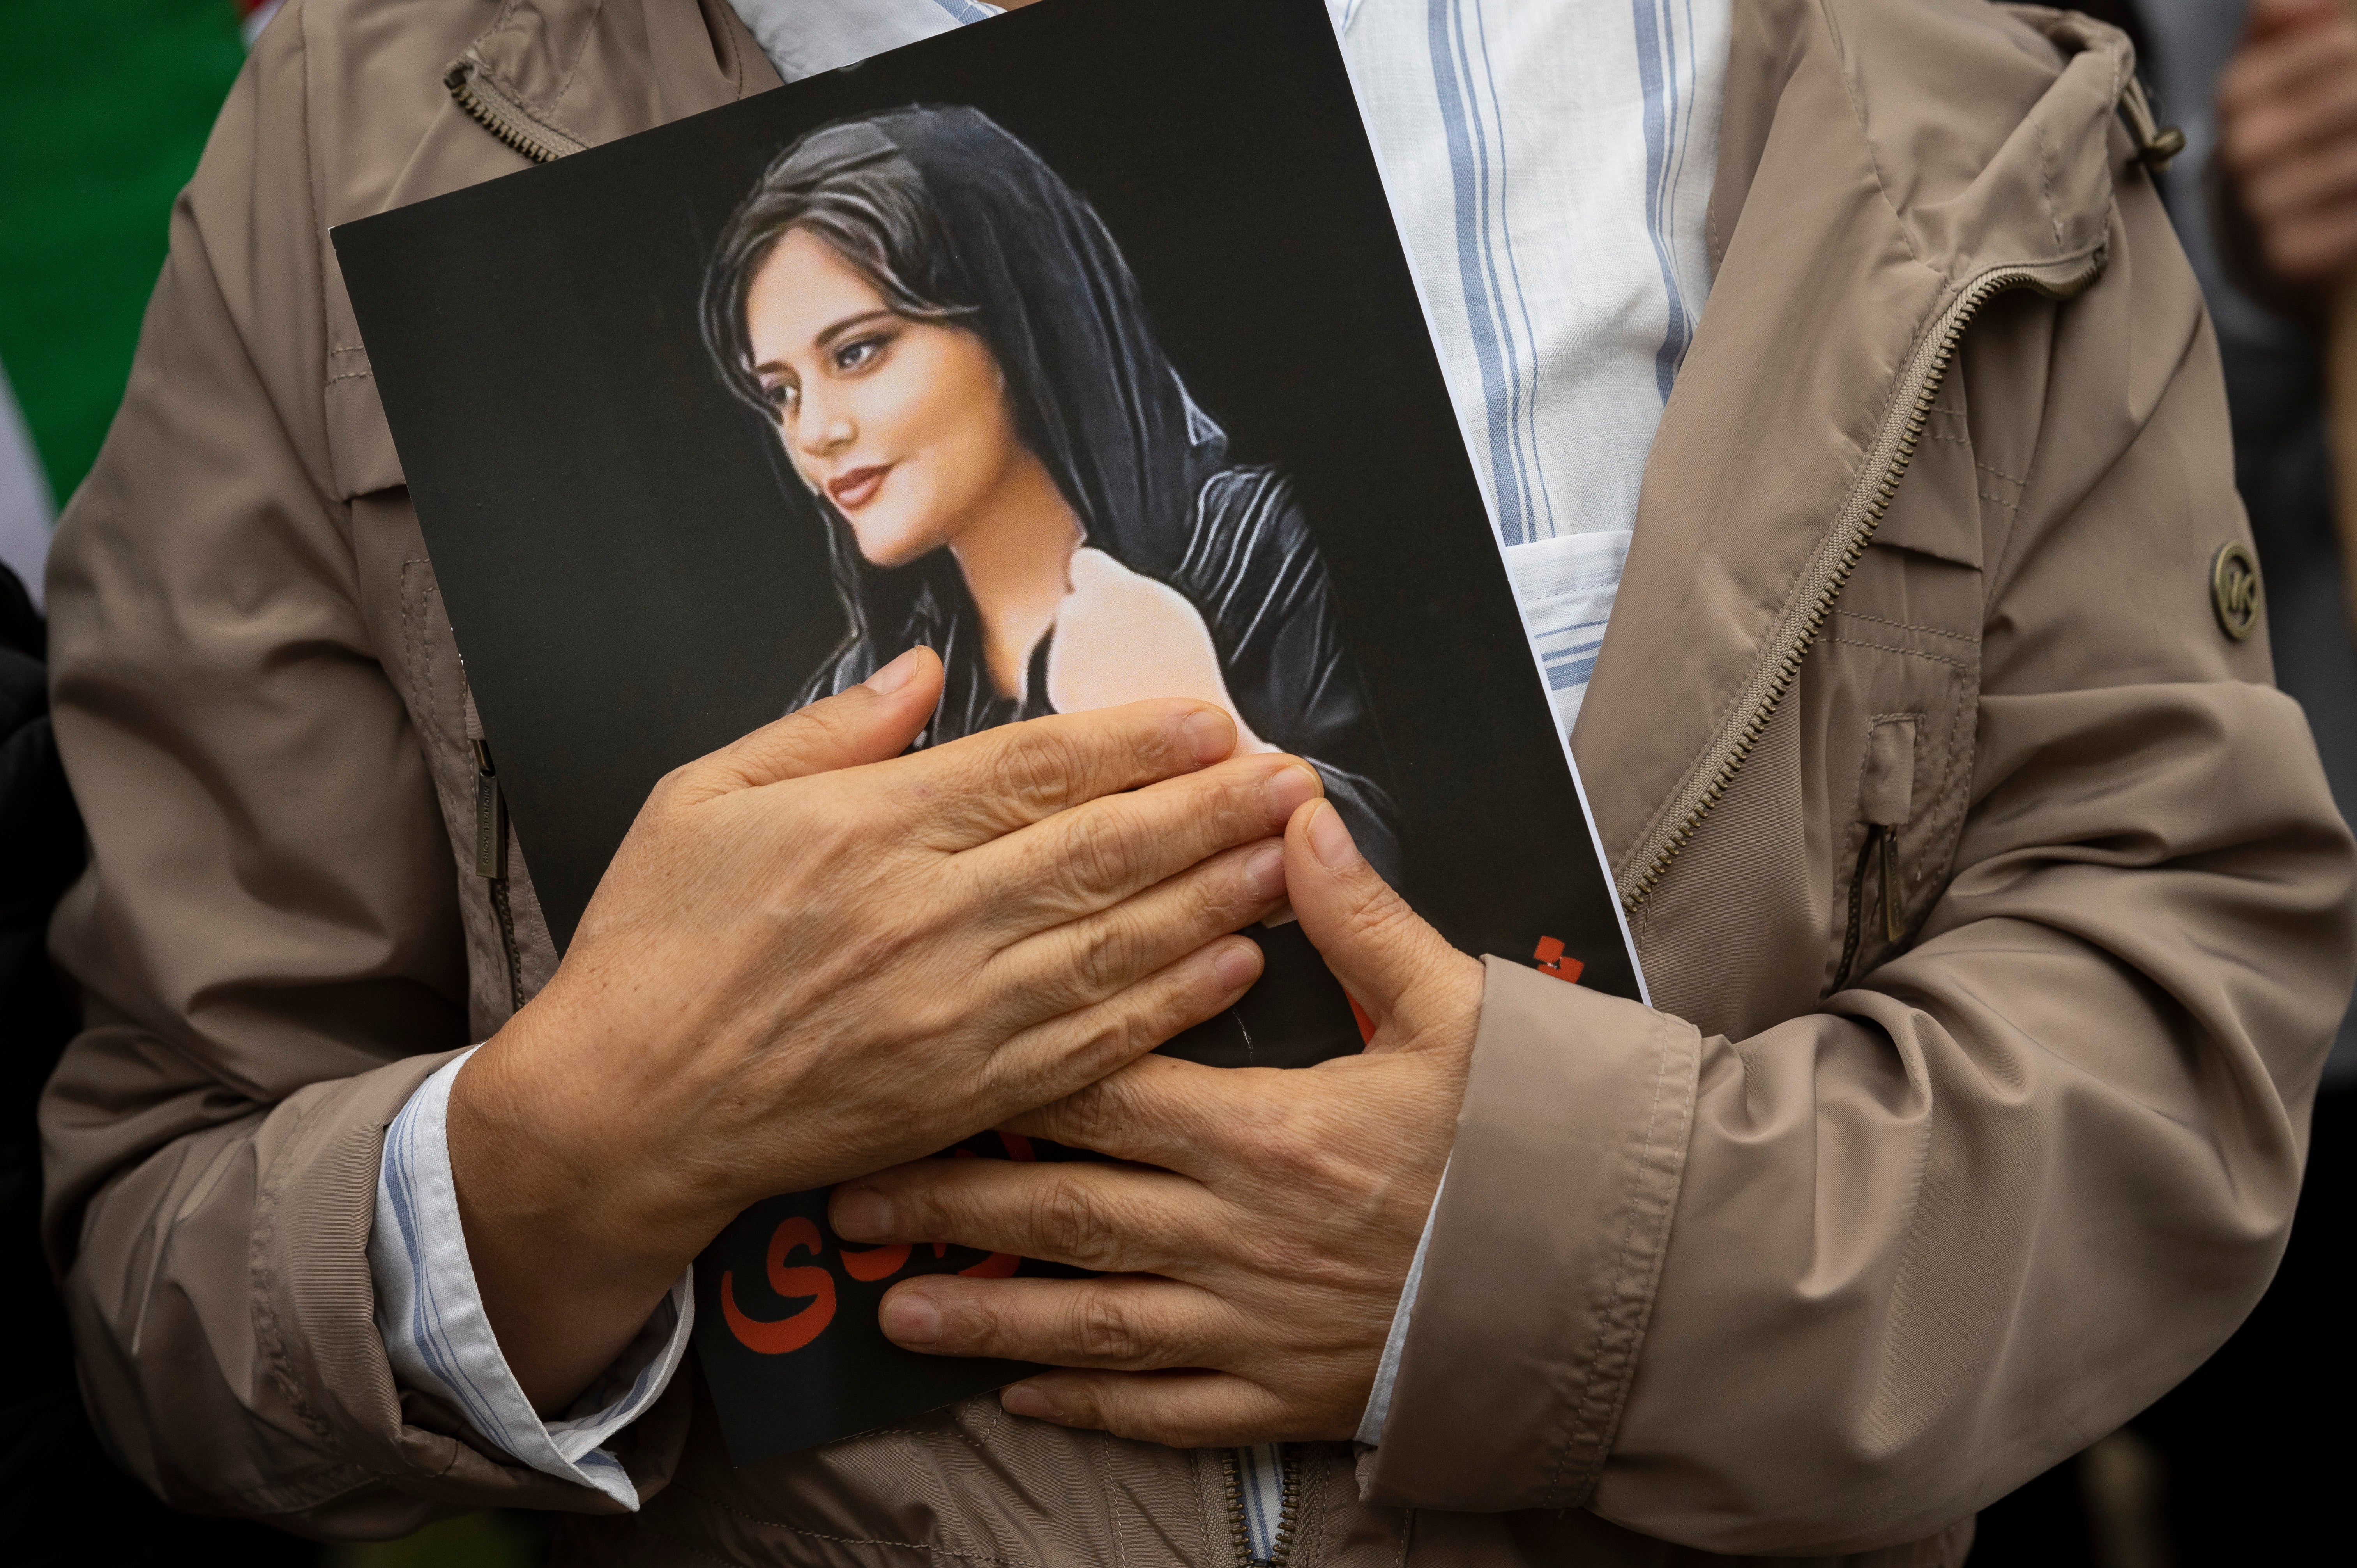 A portrait of Mahsa Amini is held during a rally calling for regime change in Iran following the death of Amini, a young woman who died after being arrested in Tehran